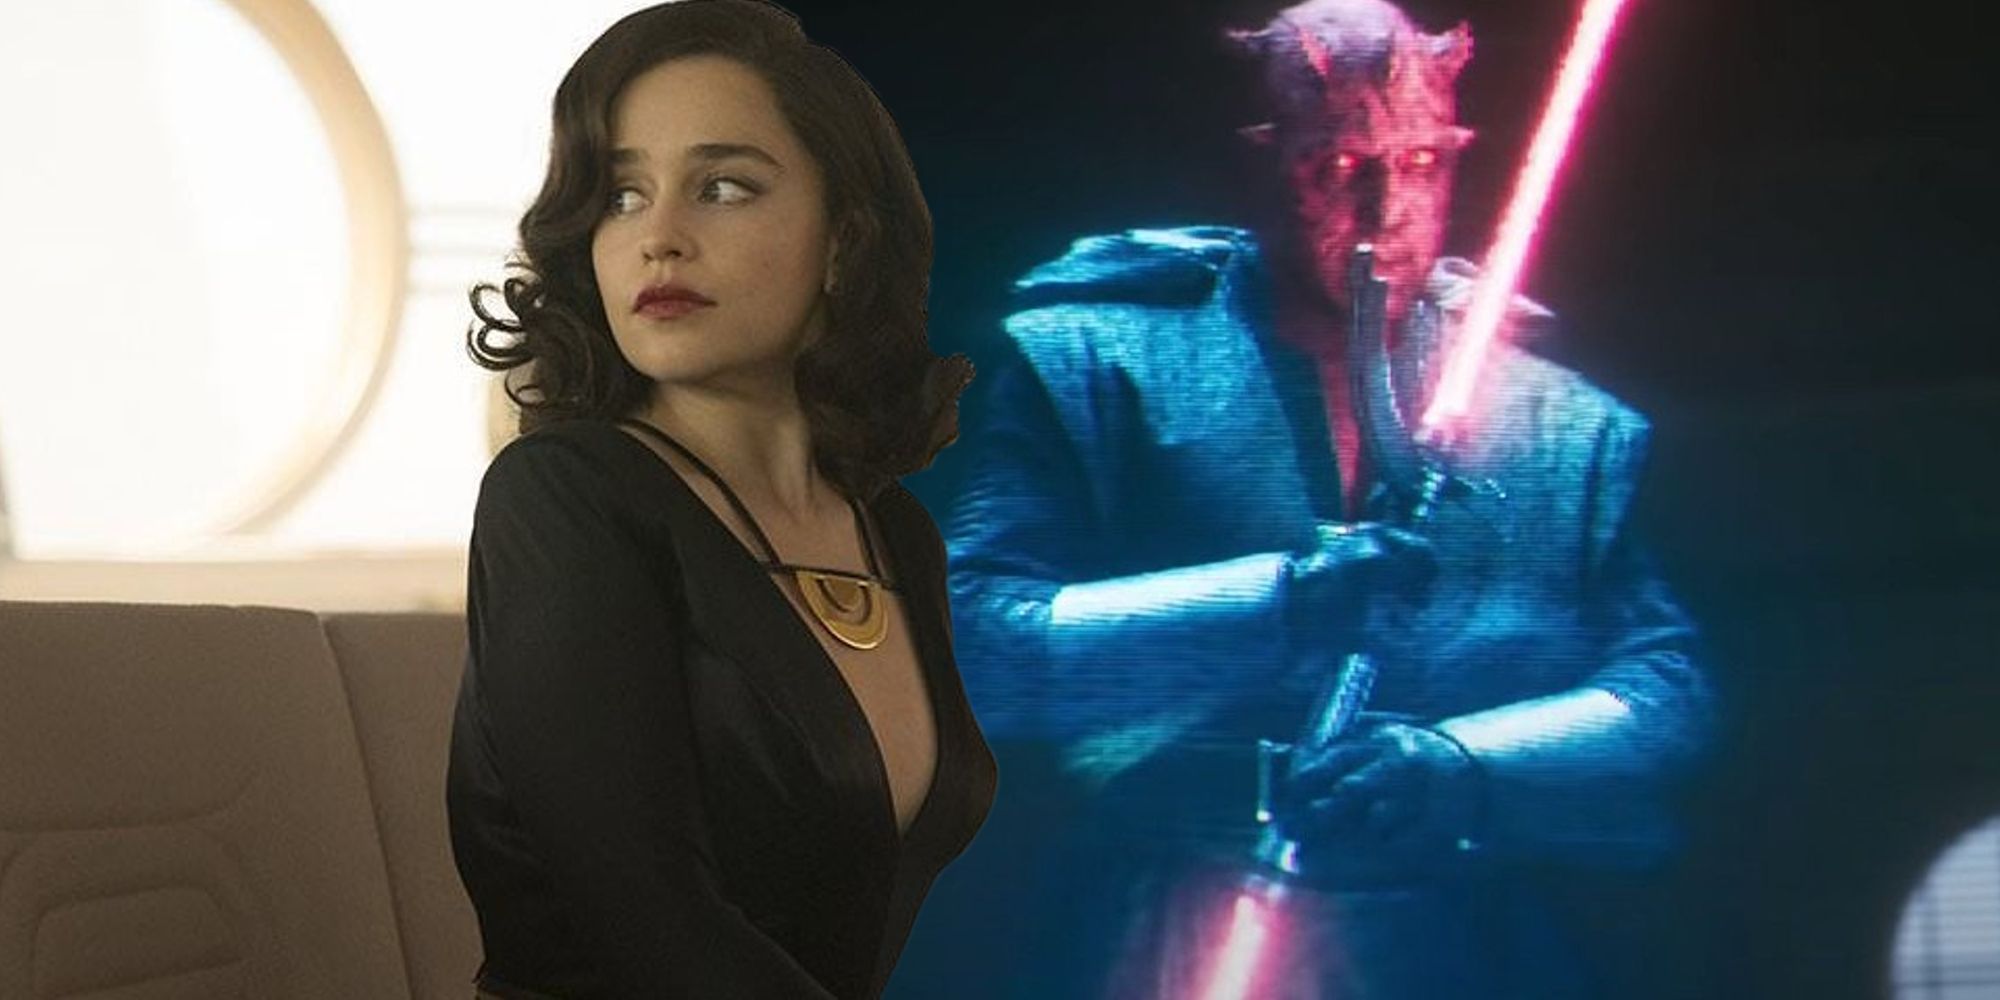 Emilia Clarke as Qi'ra and Ray Park as Maul in Solo: A Star Wars Story